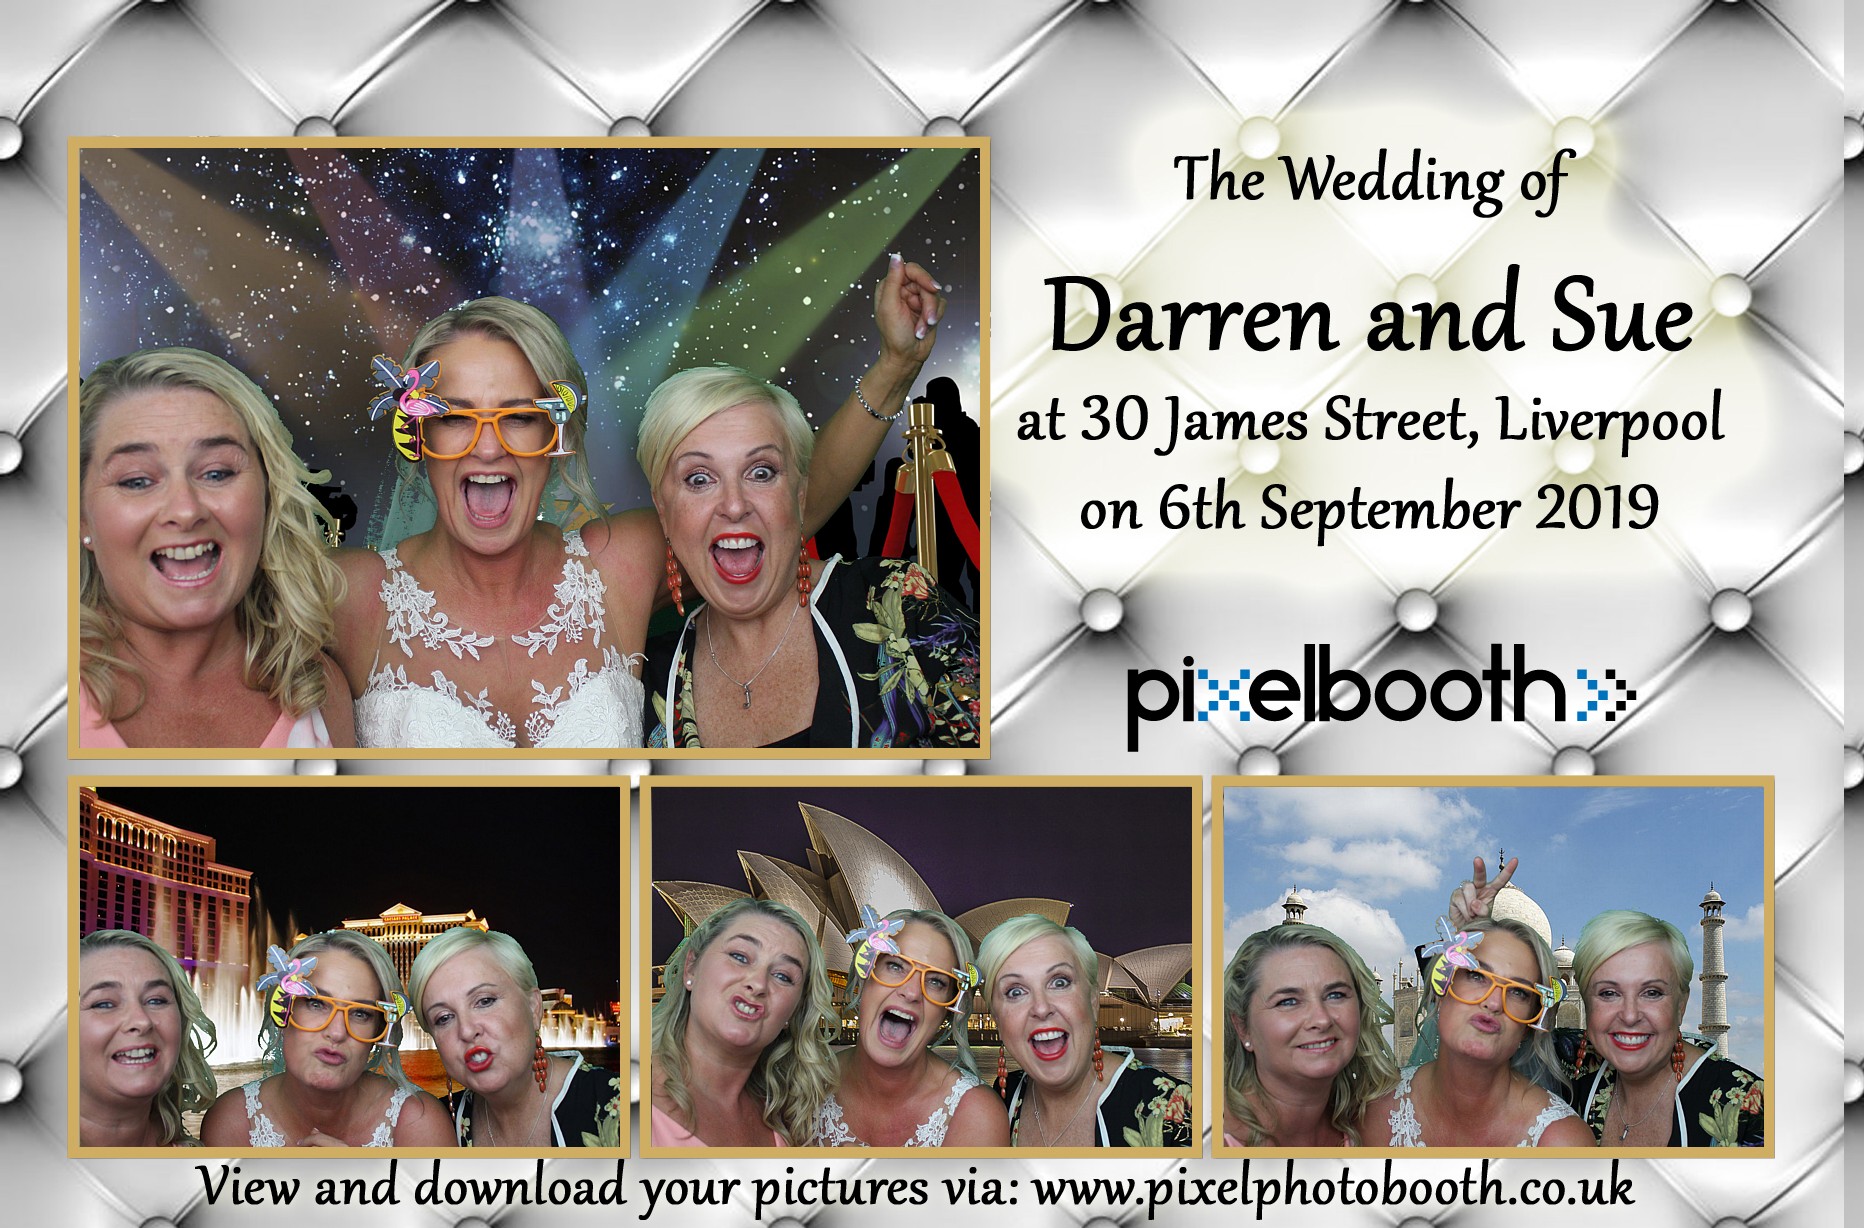 6th Sept 2019: Darren and Sue's Wedding at 30 James Street